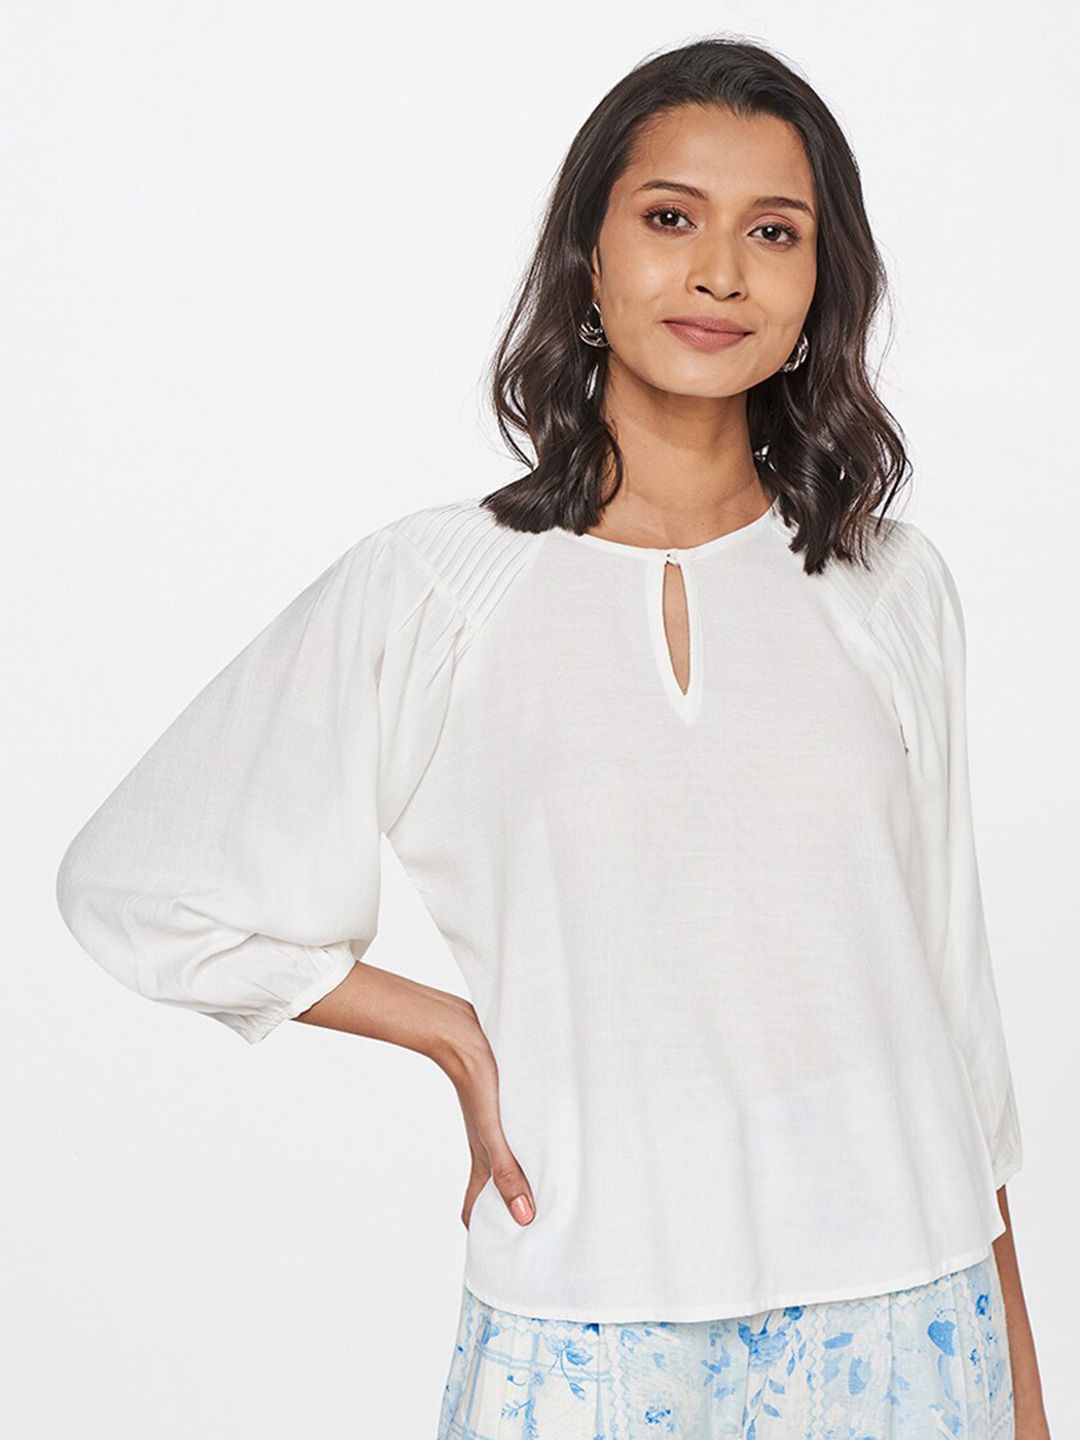 AND White Top Price in India